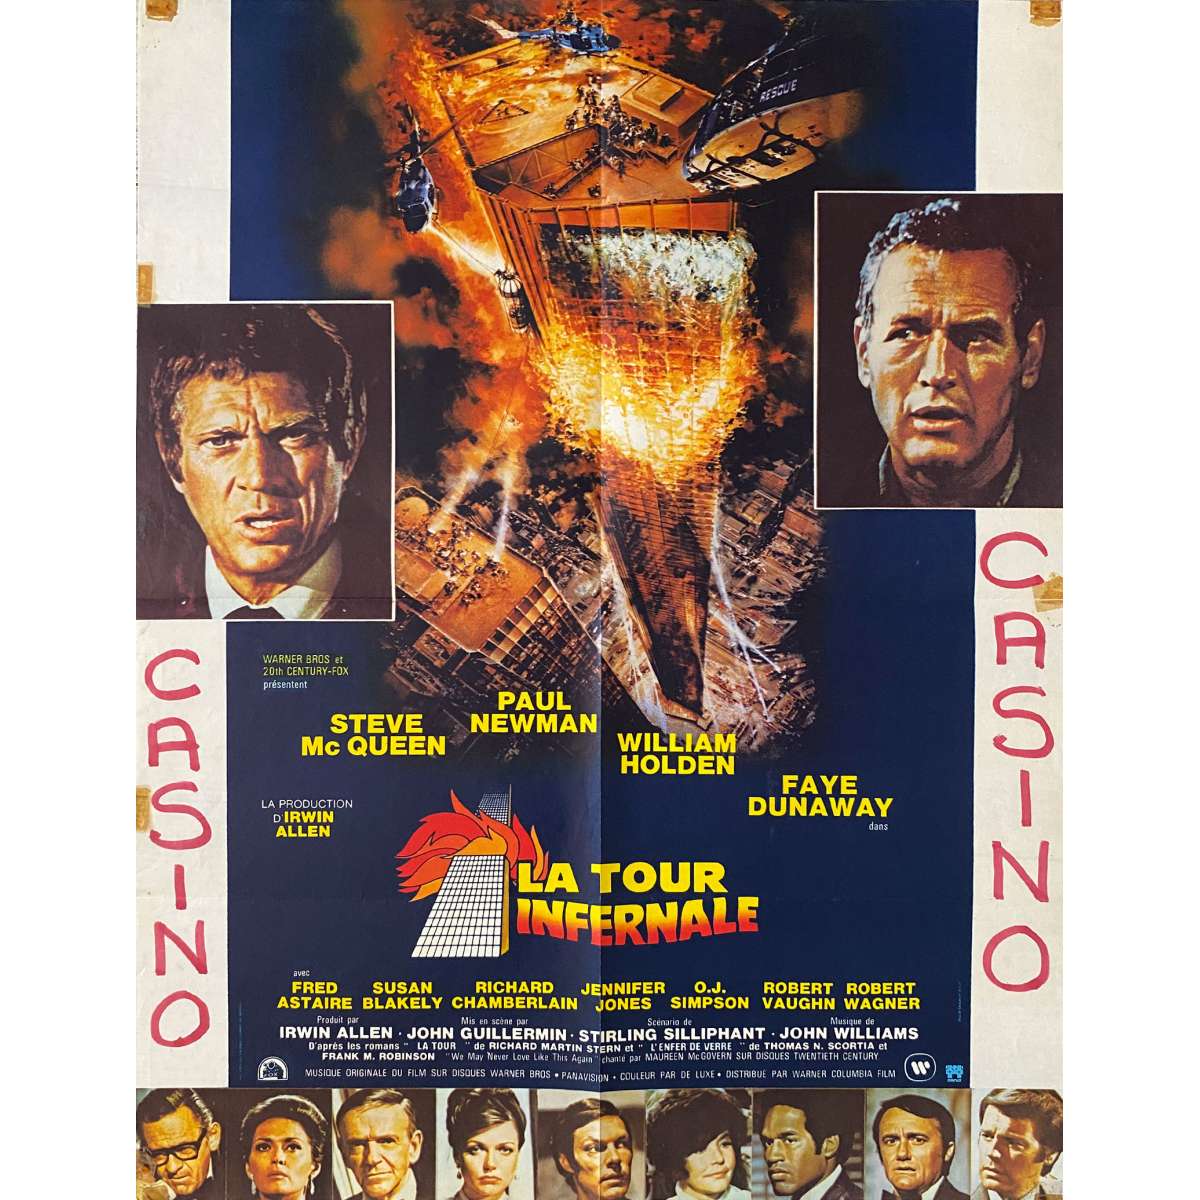 1038733 Artwork The Towering Inferno 8x10 photo other sizes inc Poster 